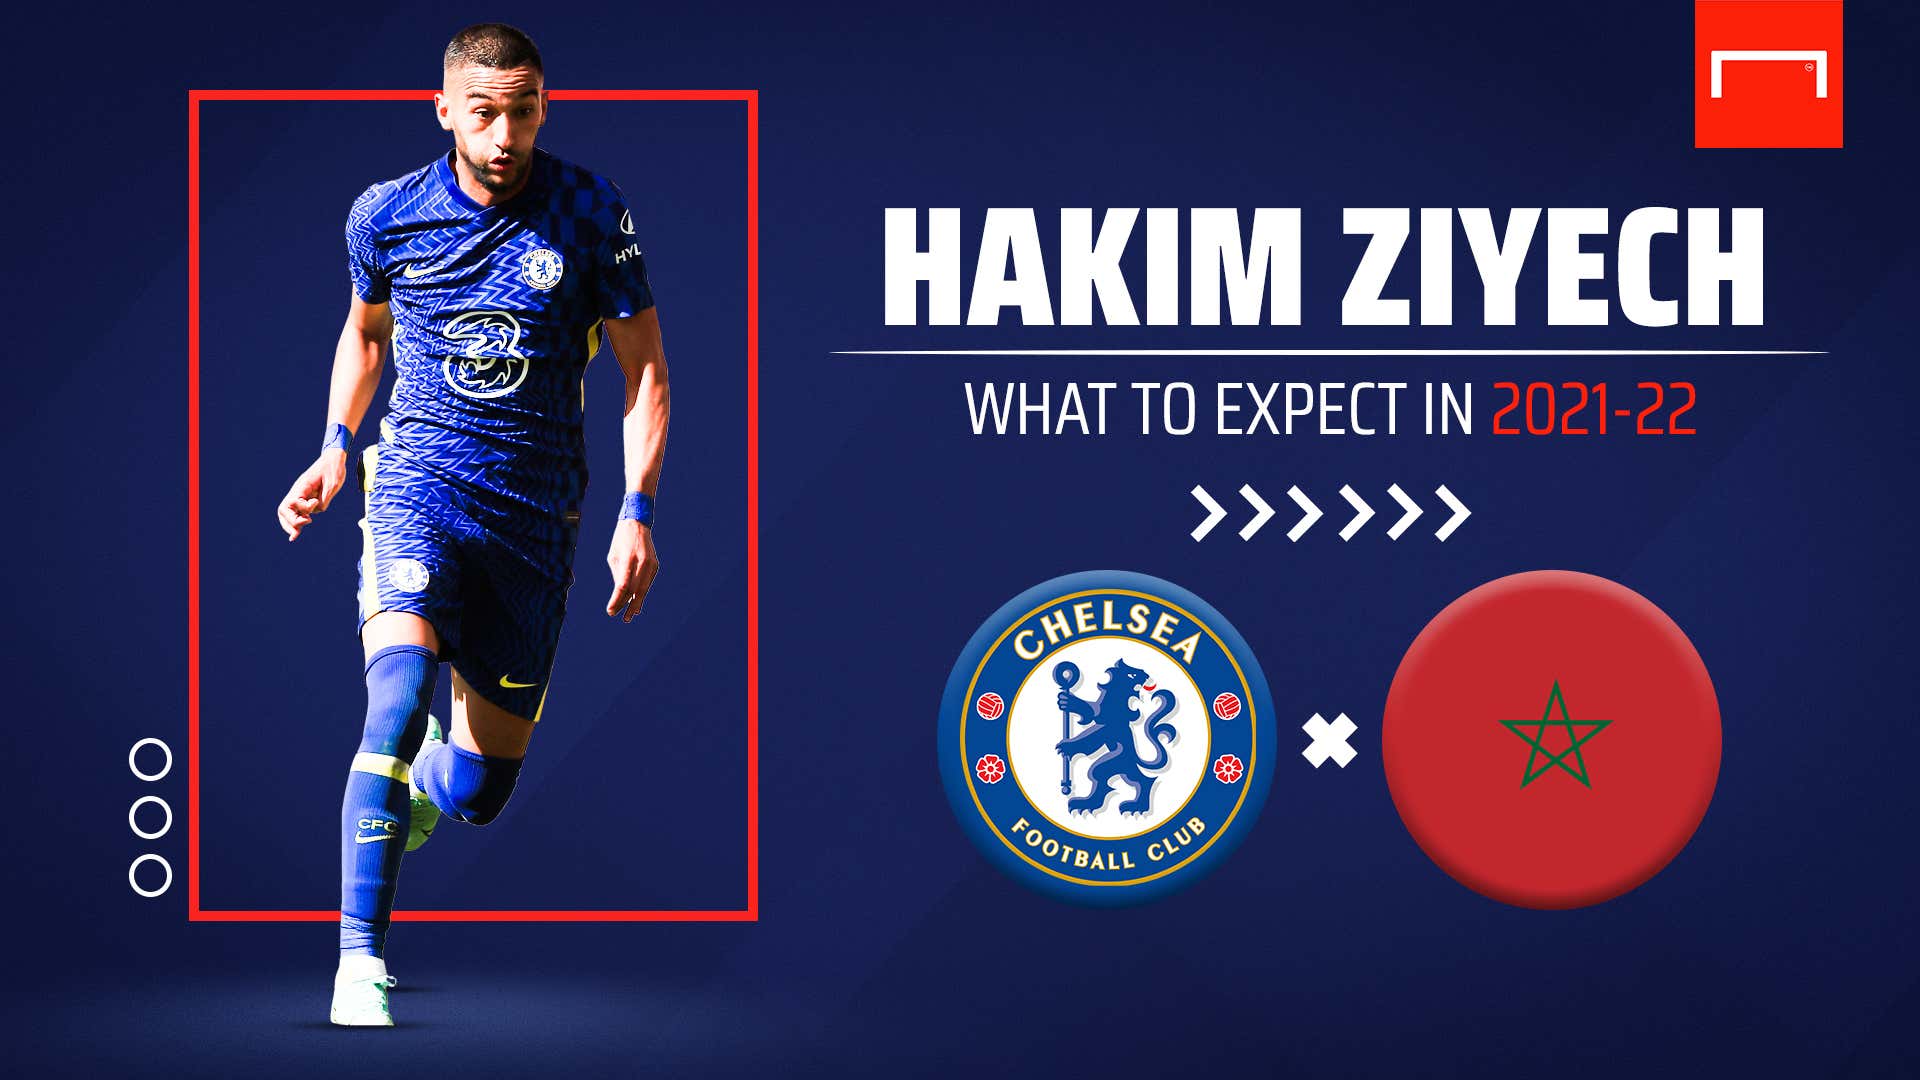 Hakim Ziyech: What to expect